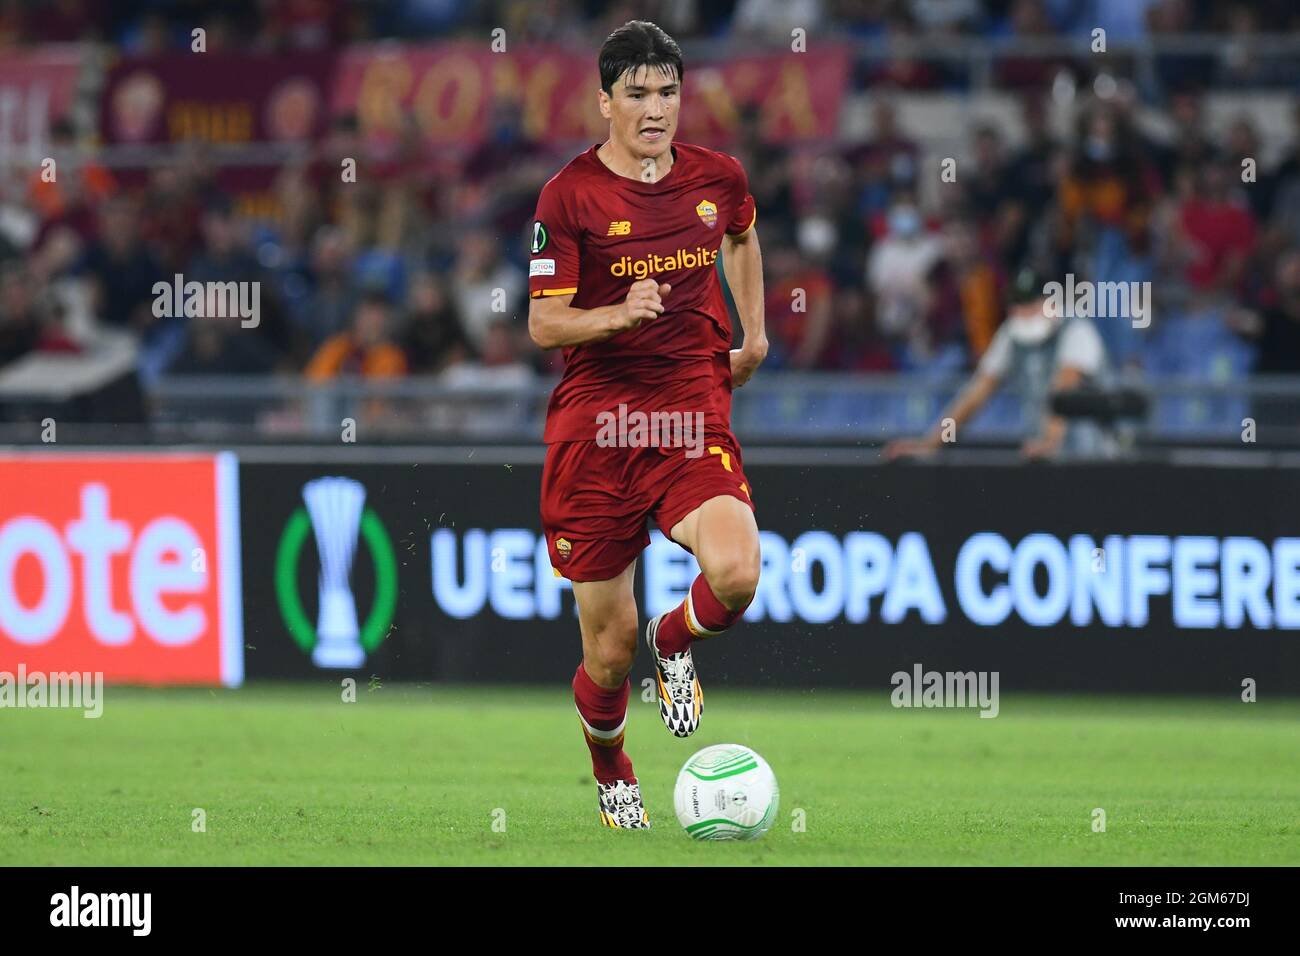 Rome, Lazio. 16th Sep, 2021. Eldor Shomurodov of AS Roma during the Conference League match between AS Roma v CSKA Sofia at Olimpico stadium in Rome, Italy, September 16, 2021. Fotografo01 Credit: Independent Photo Agency/Alamy Live News Stock Photo